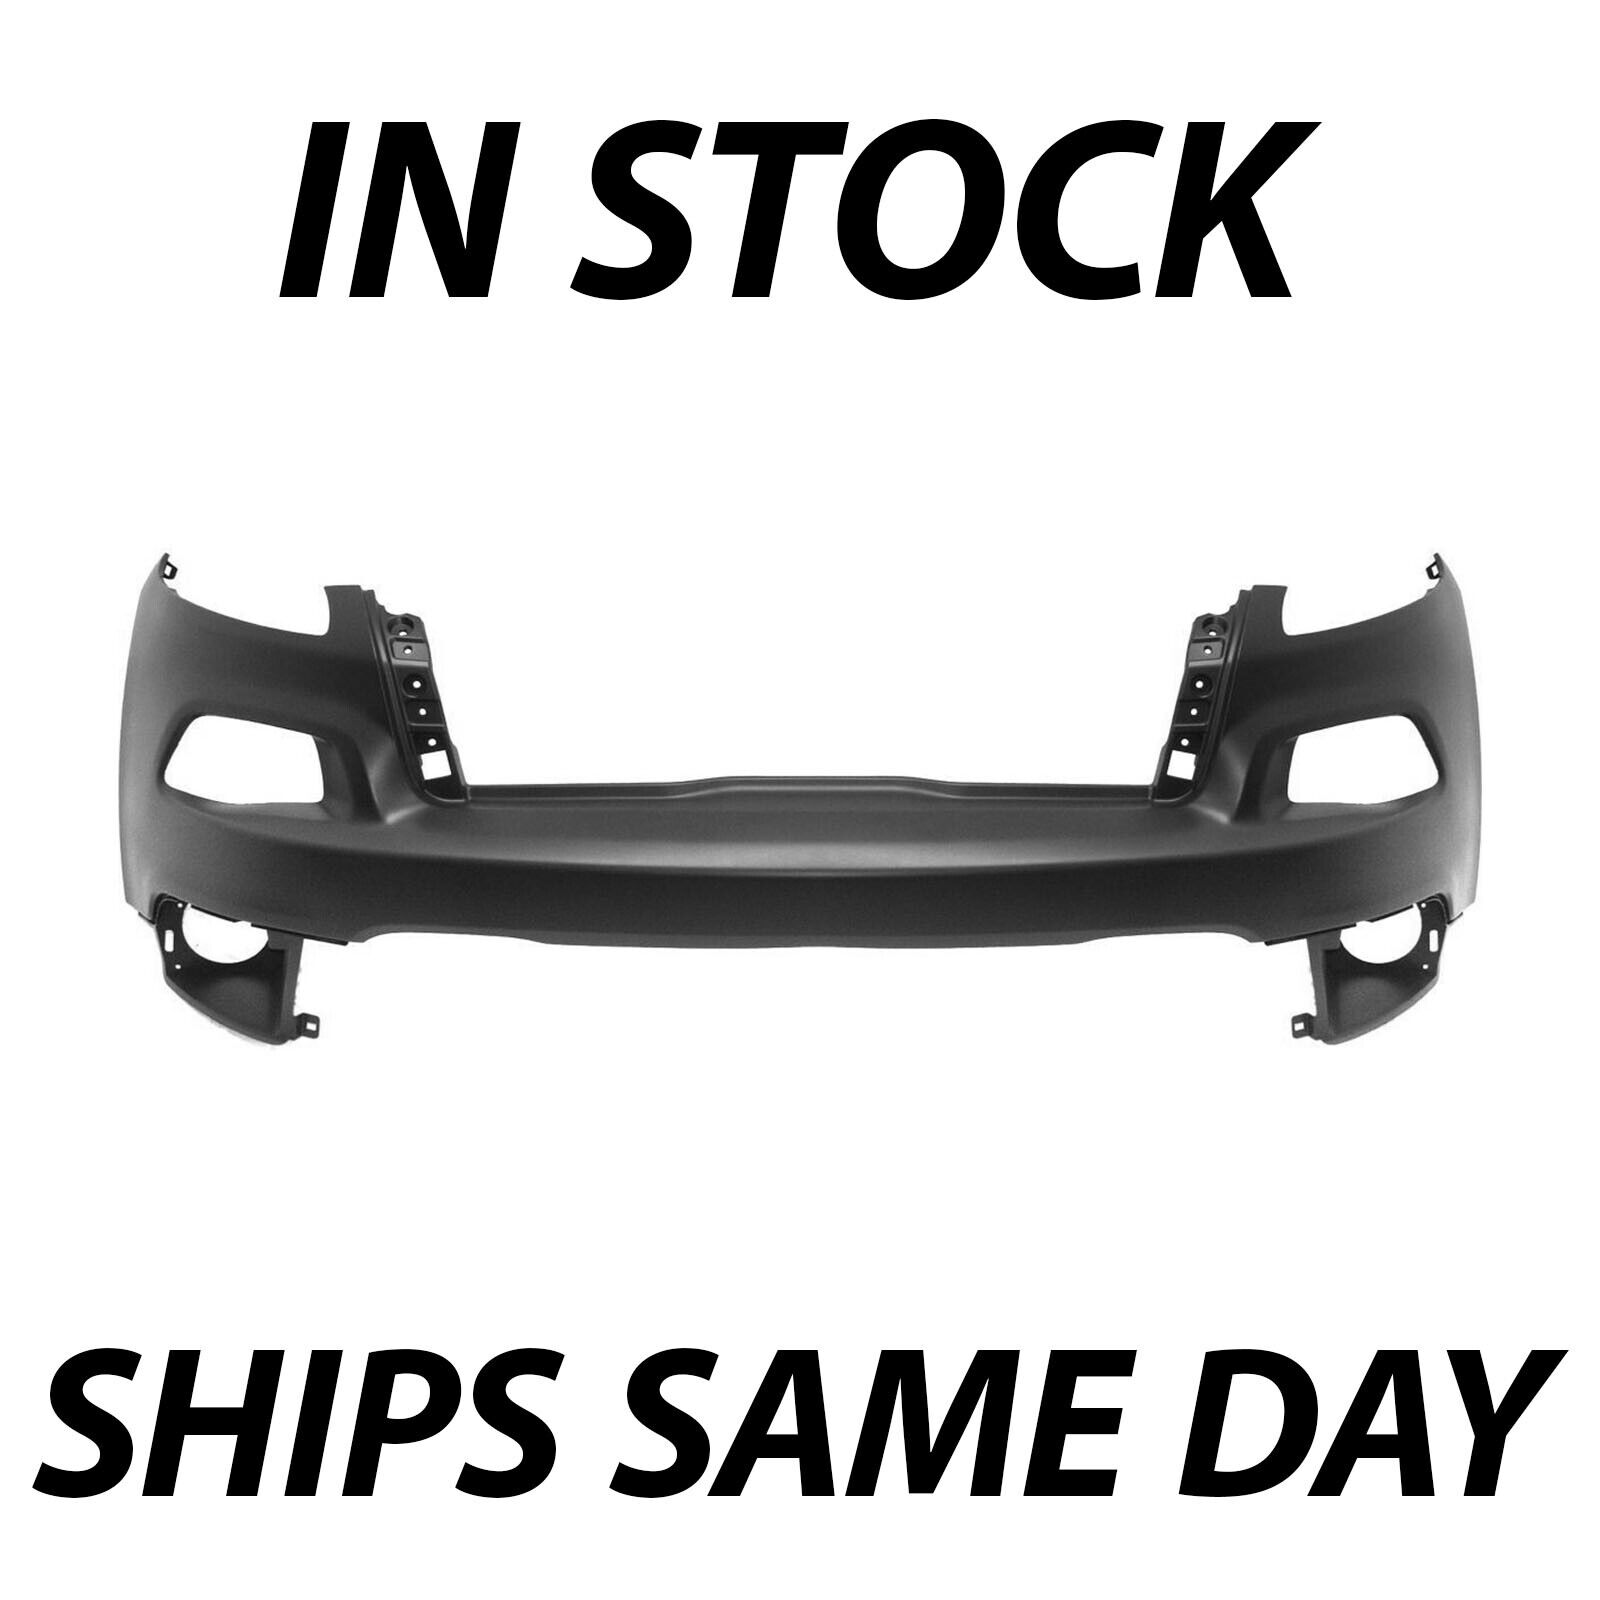 NEW Primered - Front Upper Bumper Cover Replacement for 2014-2018 Jeep Cherokee